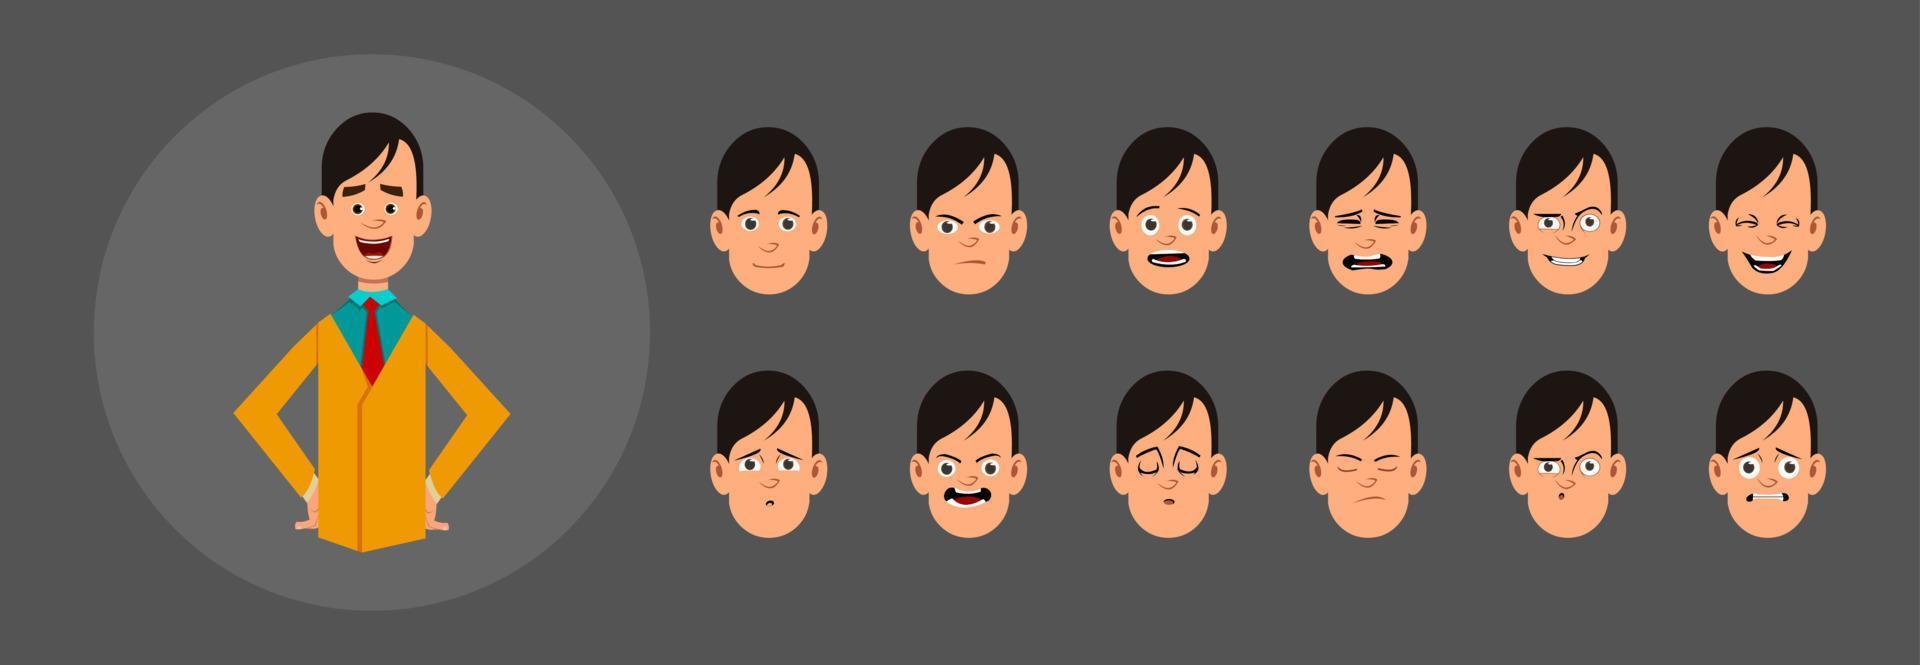 People with different emotions.  Different facial emotions for custom animation, motion or design. vector